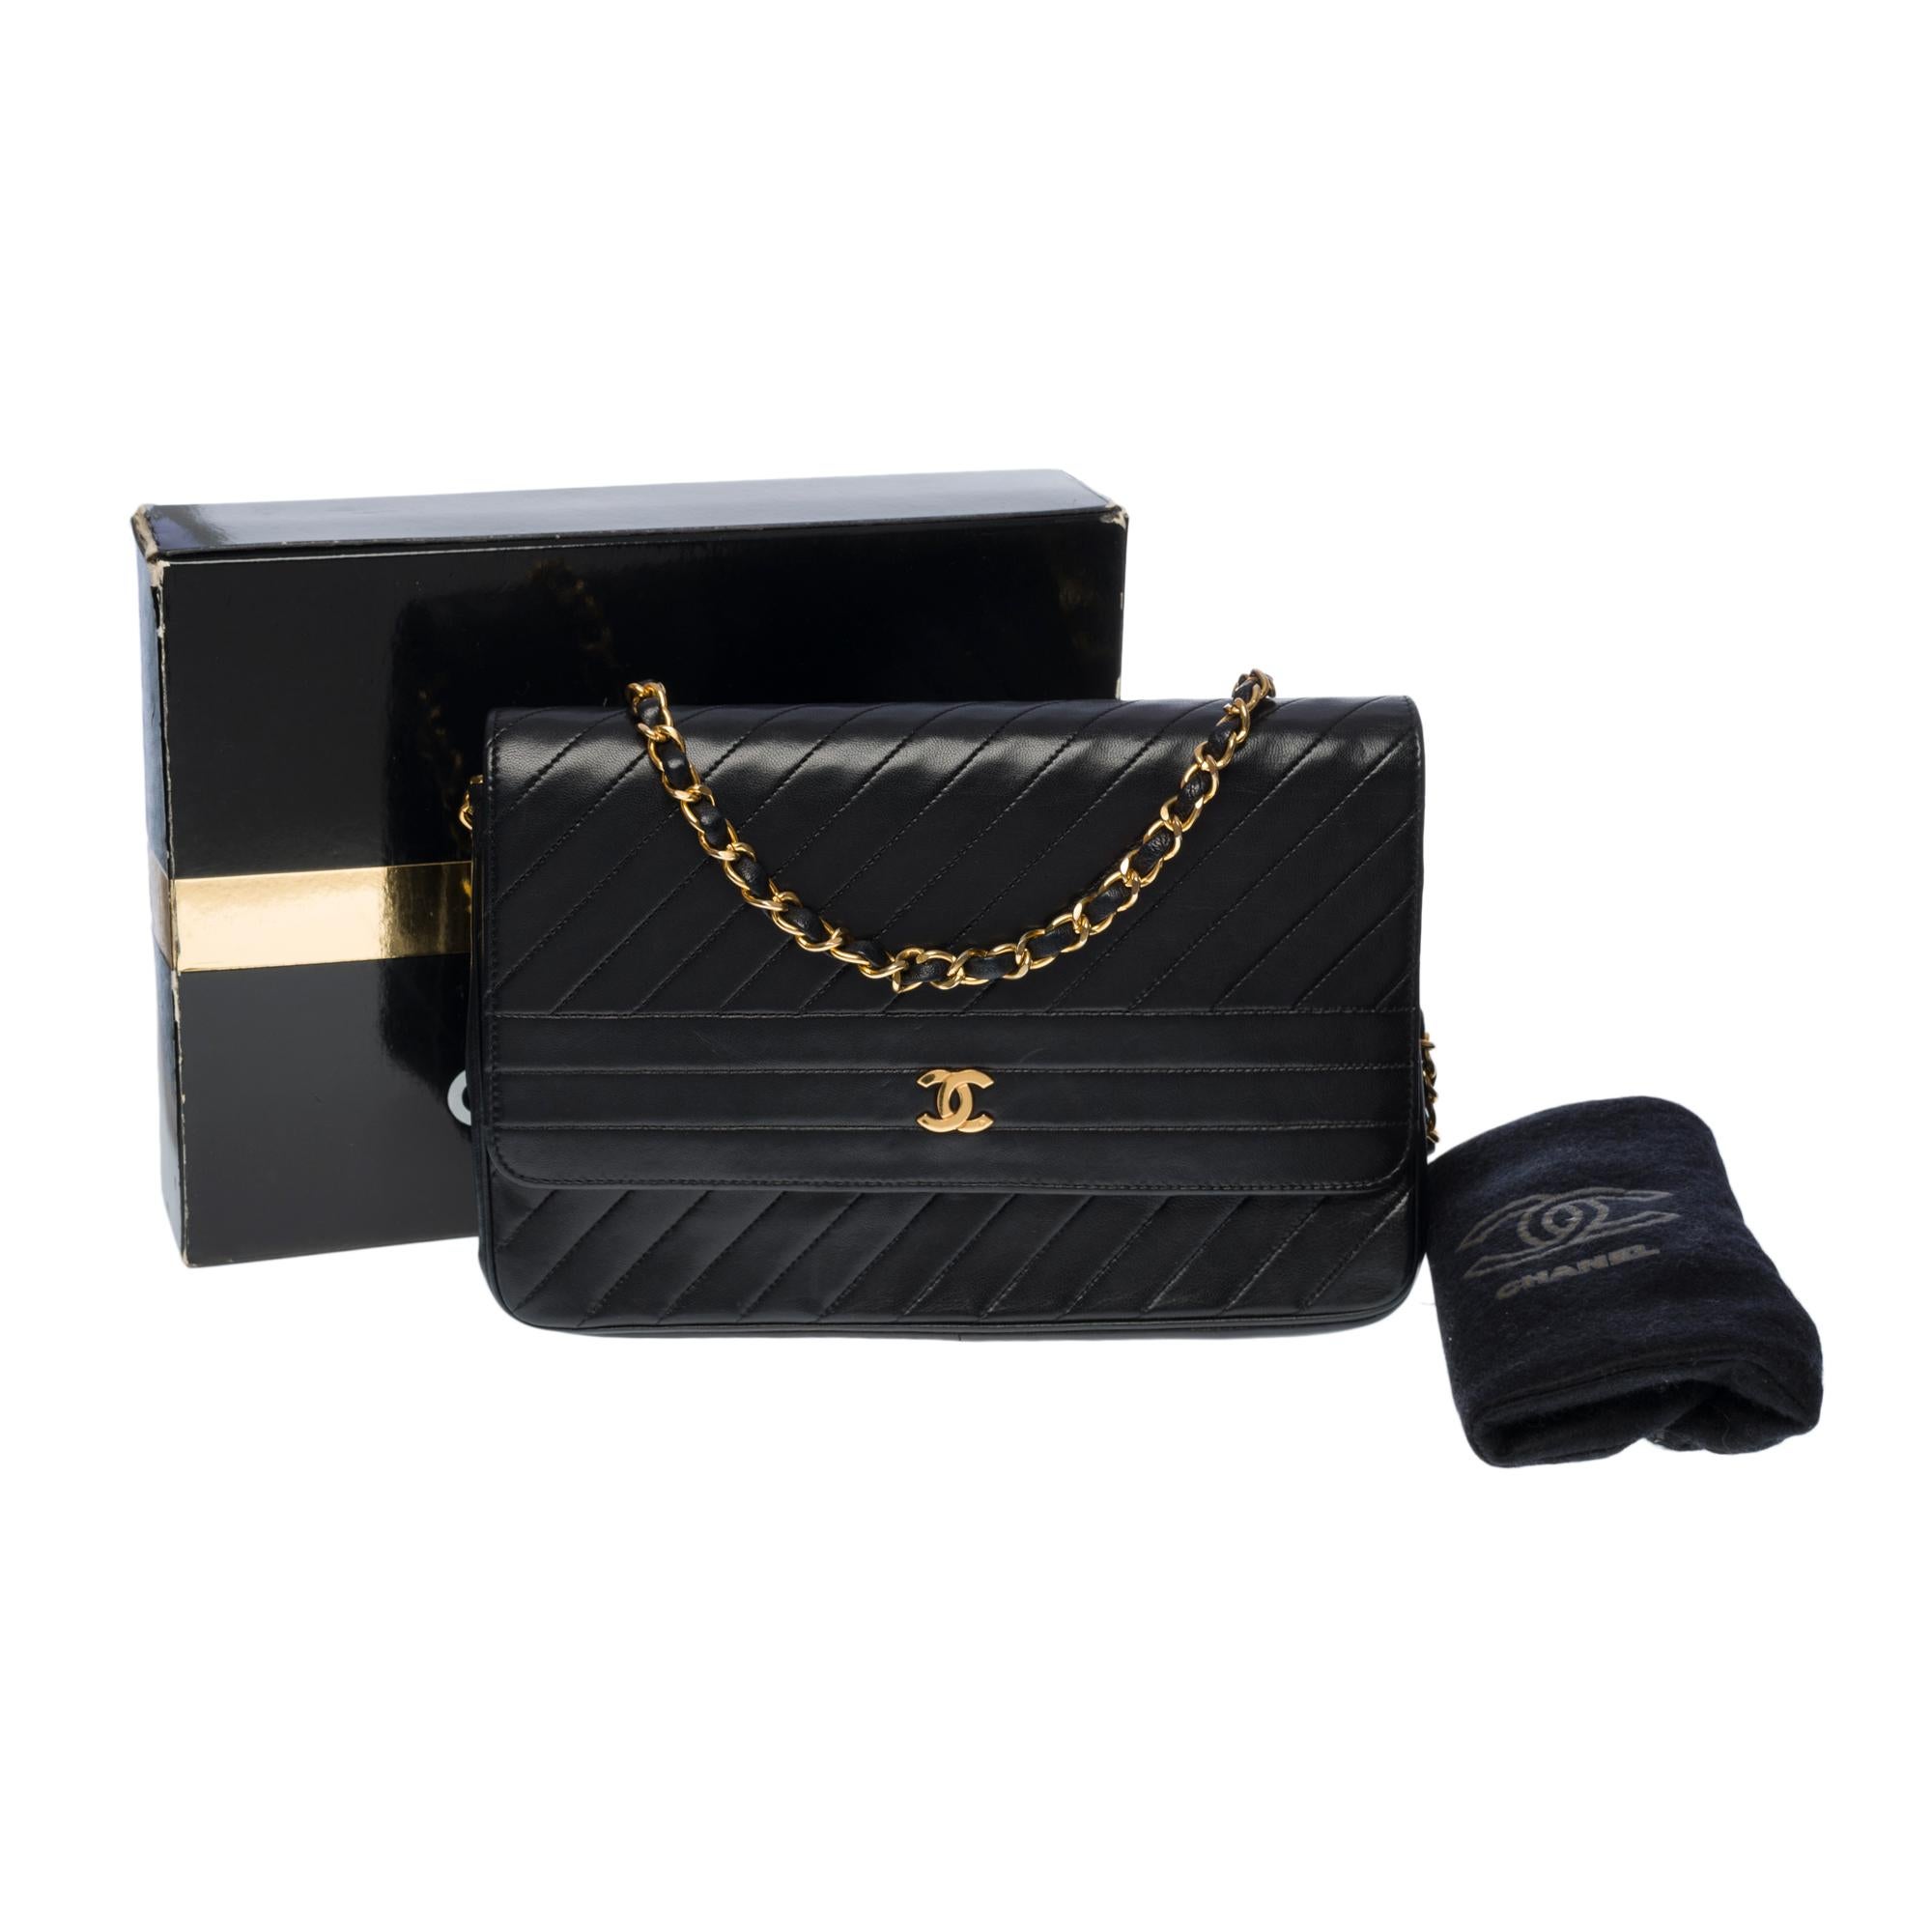 Chanel Classic shoulder bag in black quilted leather with herringbone , GHW 6